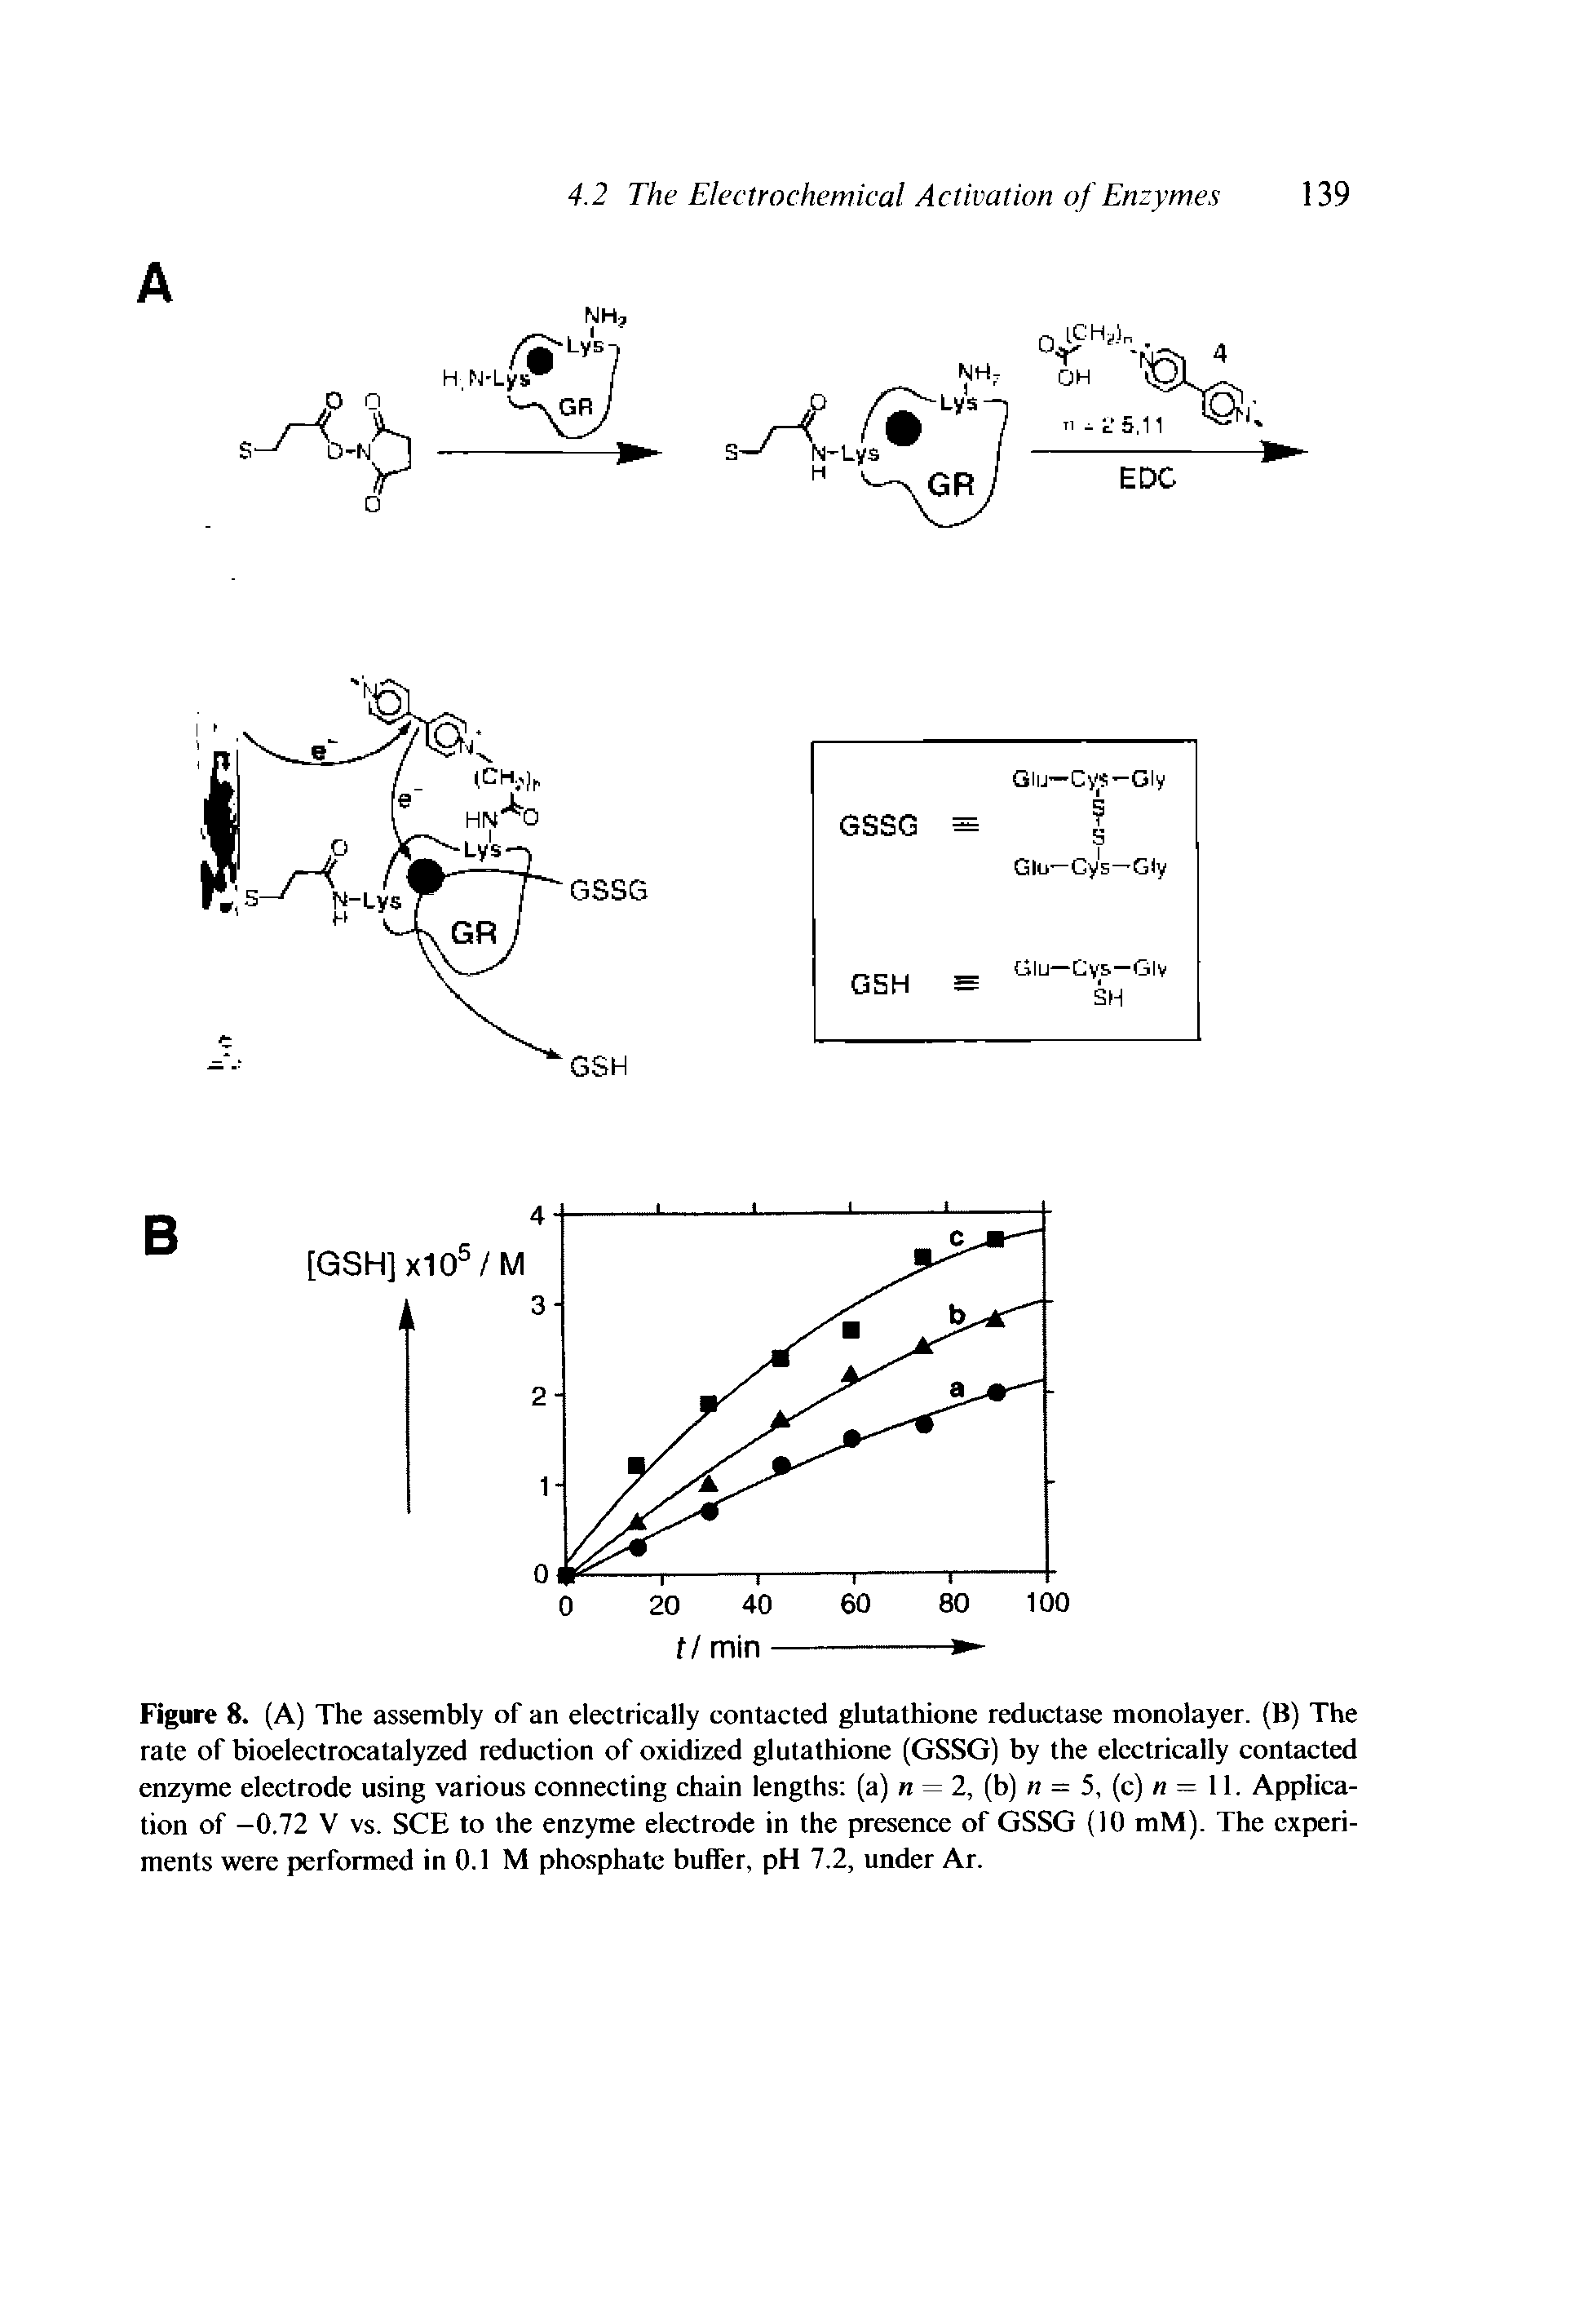 Figure 8. (A) The assembly of an electrically contacted glutathione reductase monolayer. (B) The rate of bioelectrocatalyzed reduction of oxidized glutathione (GSSG) by the electrically contacted enzyme electrode using various connecting chain lengths (a) n = 2, (b) n = 5, (c) = 11. Application of -0.72 V vs. SCE to the enzyme electrode in the presence of GSSG (10 mM). The experiments were performed in 0.1 M phosphate buffer, pH 7.2, under Ar.